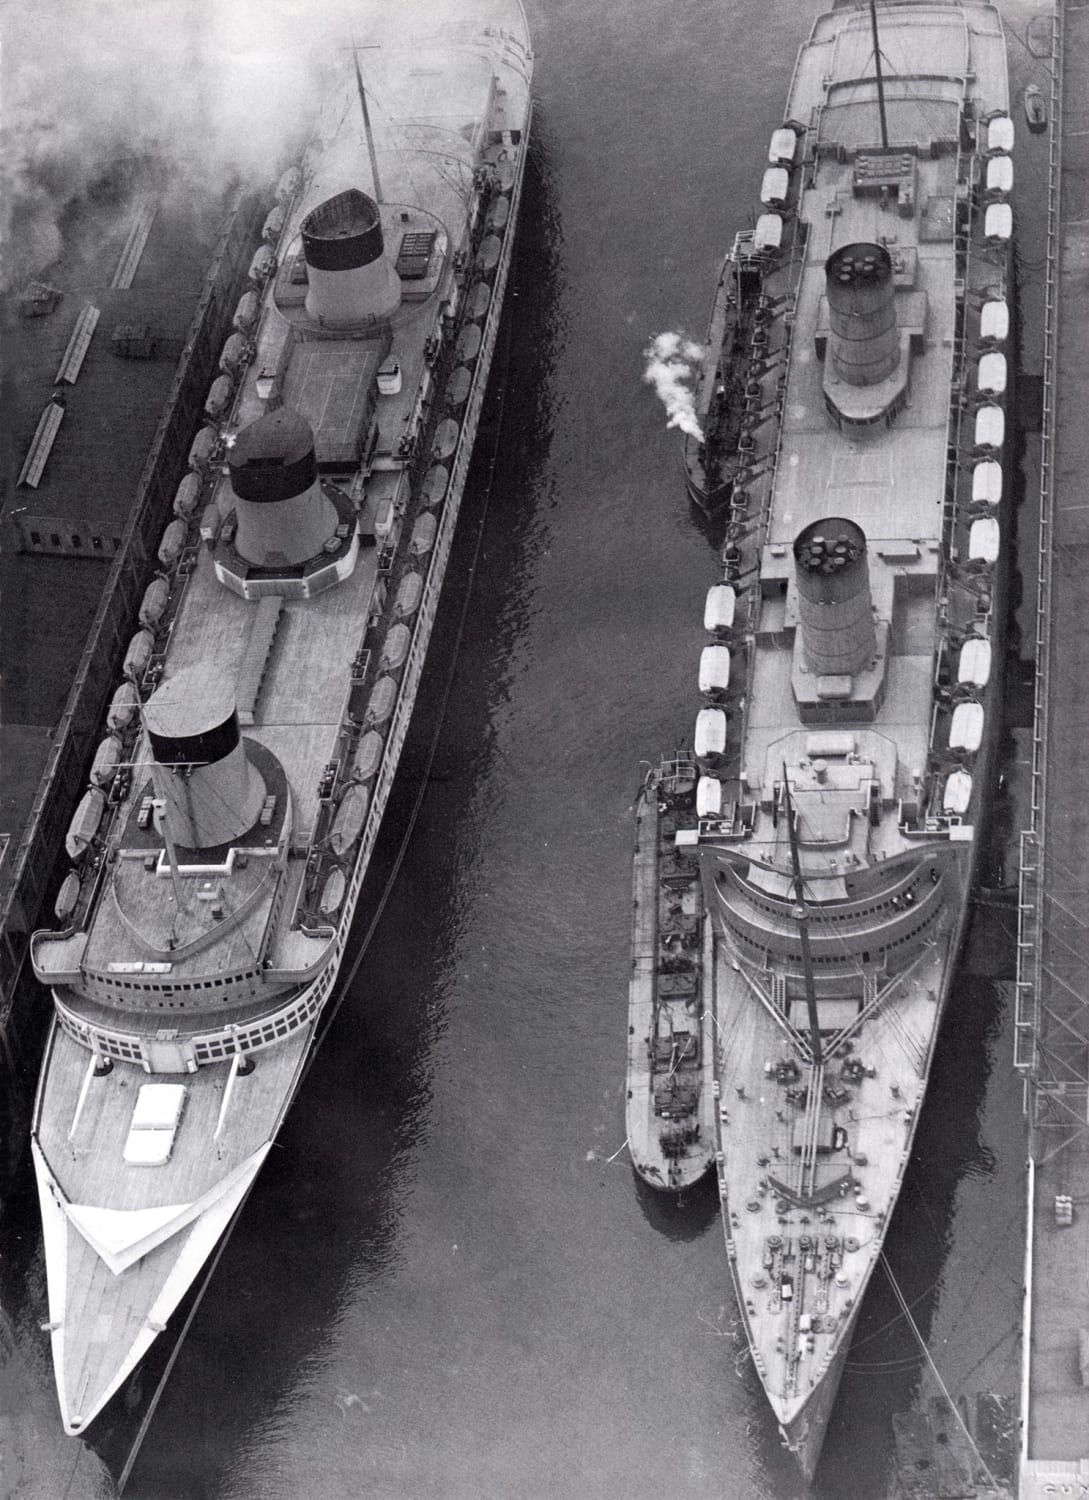 British Ocean Liner RMS Queen Elizabeth in her wartime grey colors on right and French Ocean Liner SS Normandie on left in New York City, circa 1941. QE would survive the War, while Normandie wouldn't leave that dock. A fire would claim her.